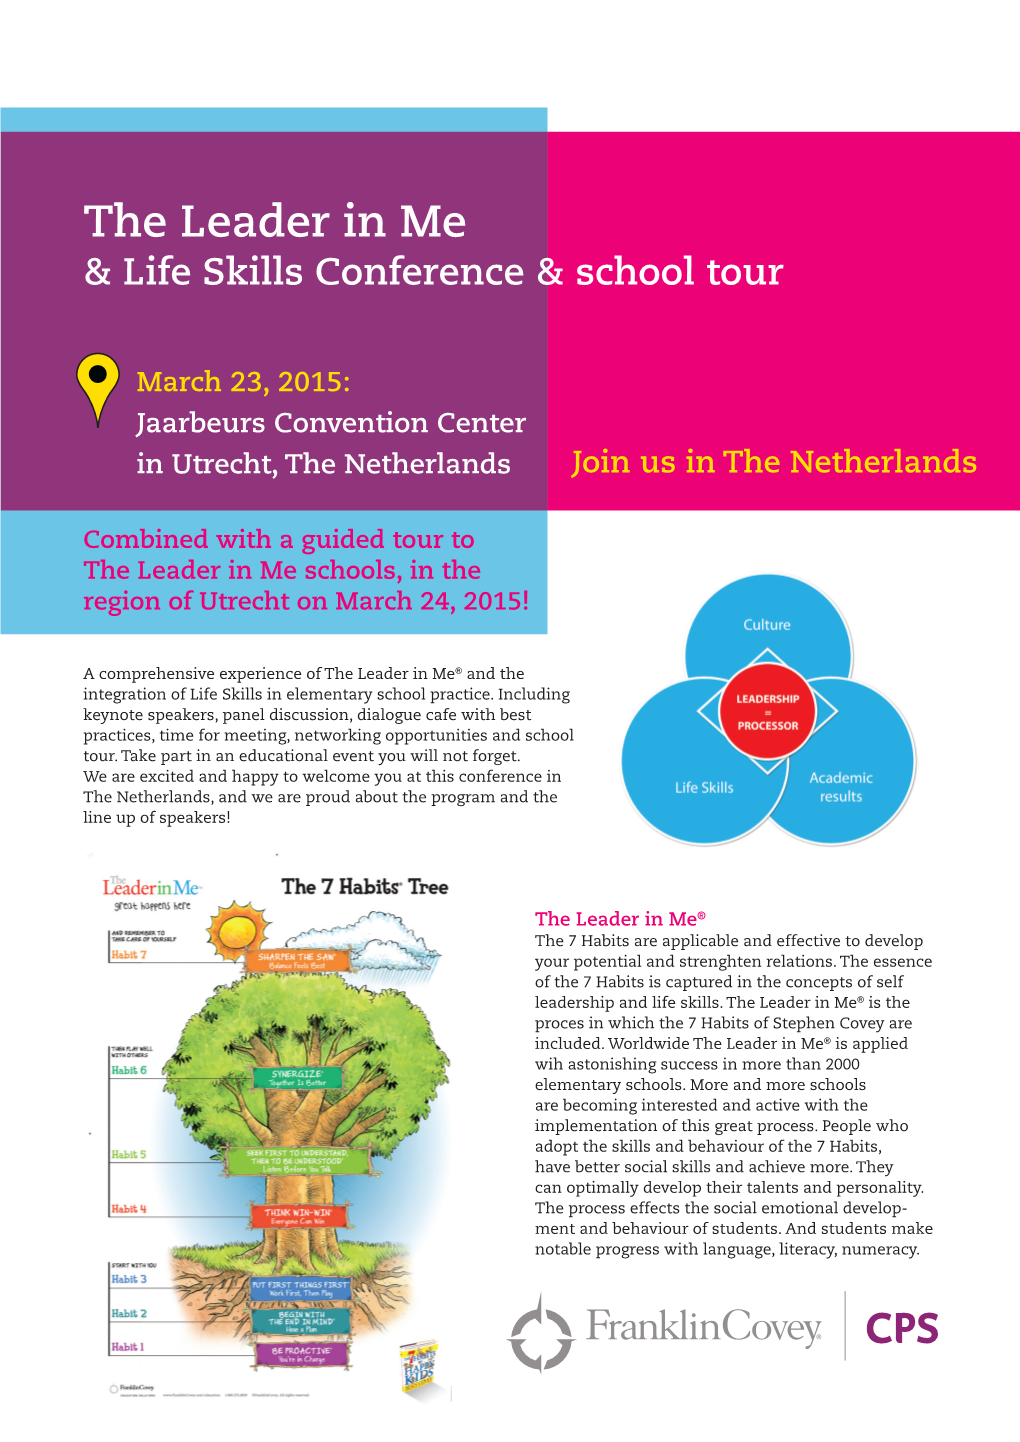 The Leader in Me & Life Skills Conference & School Tour